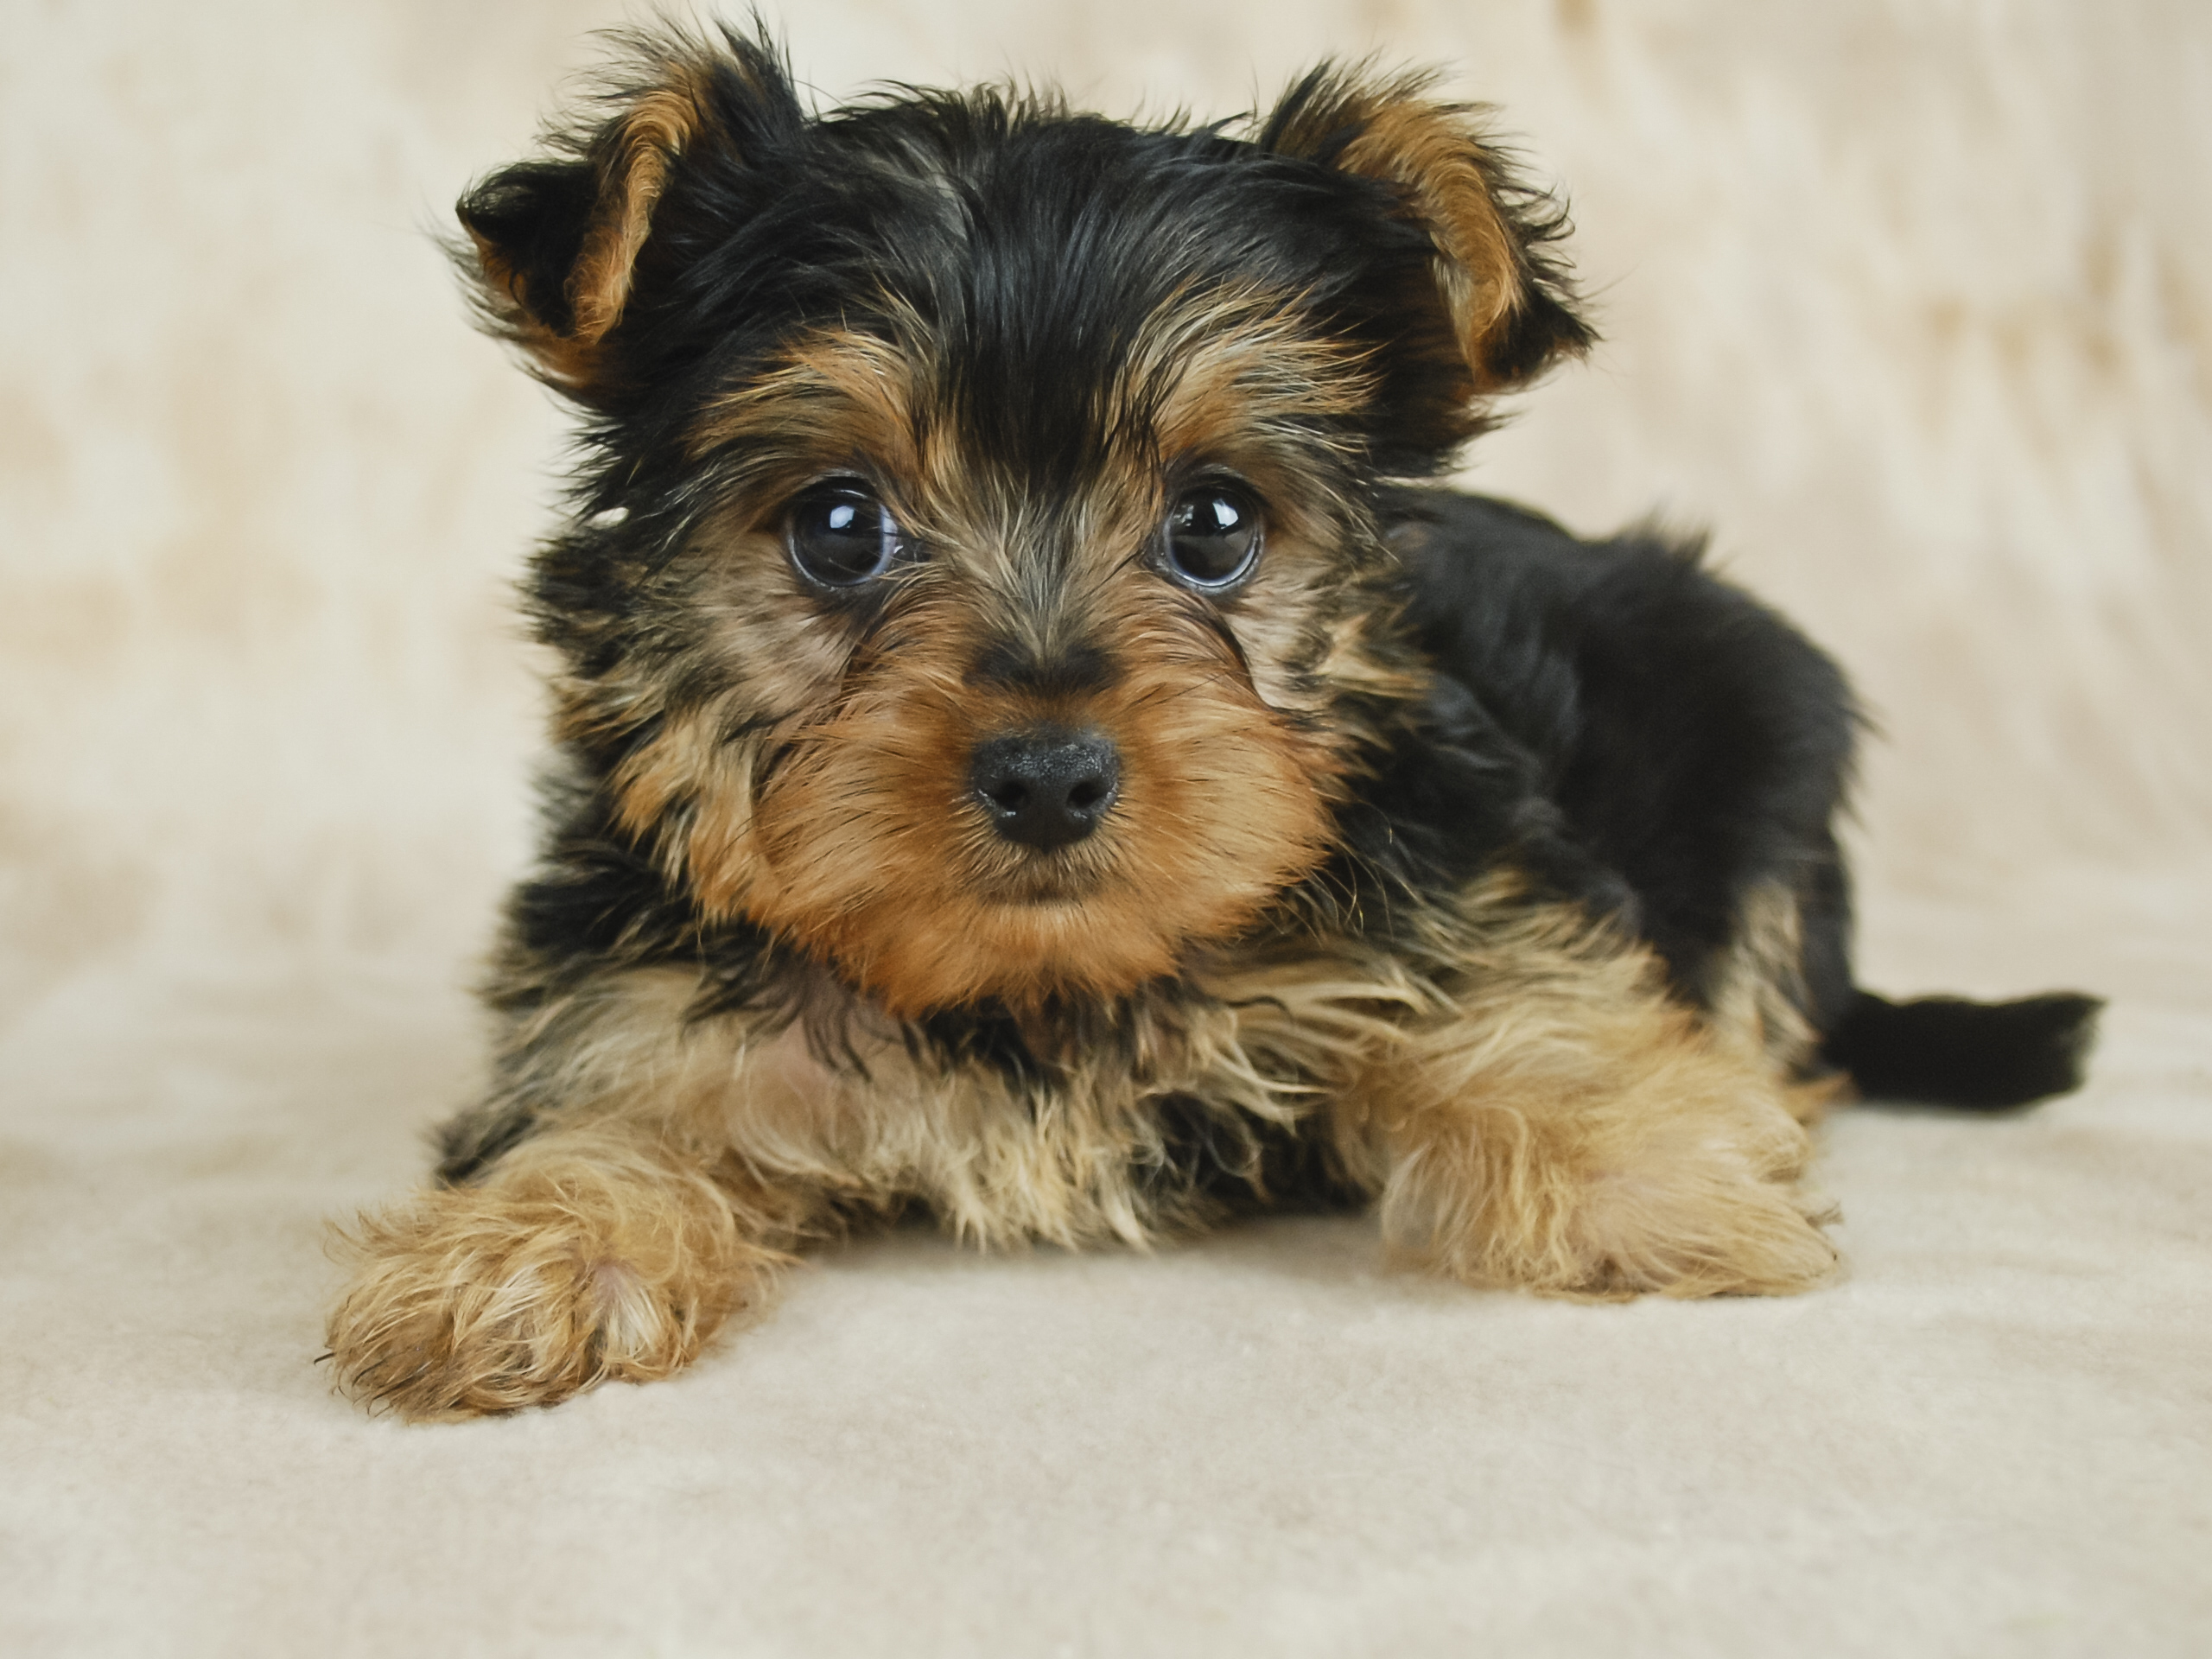 How Much Are Teacup Yorkies Puppies?